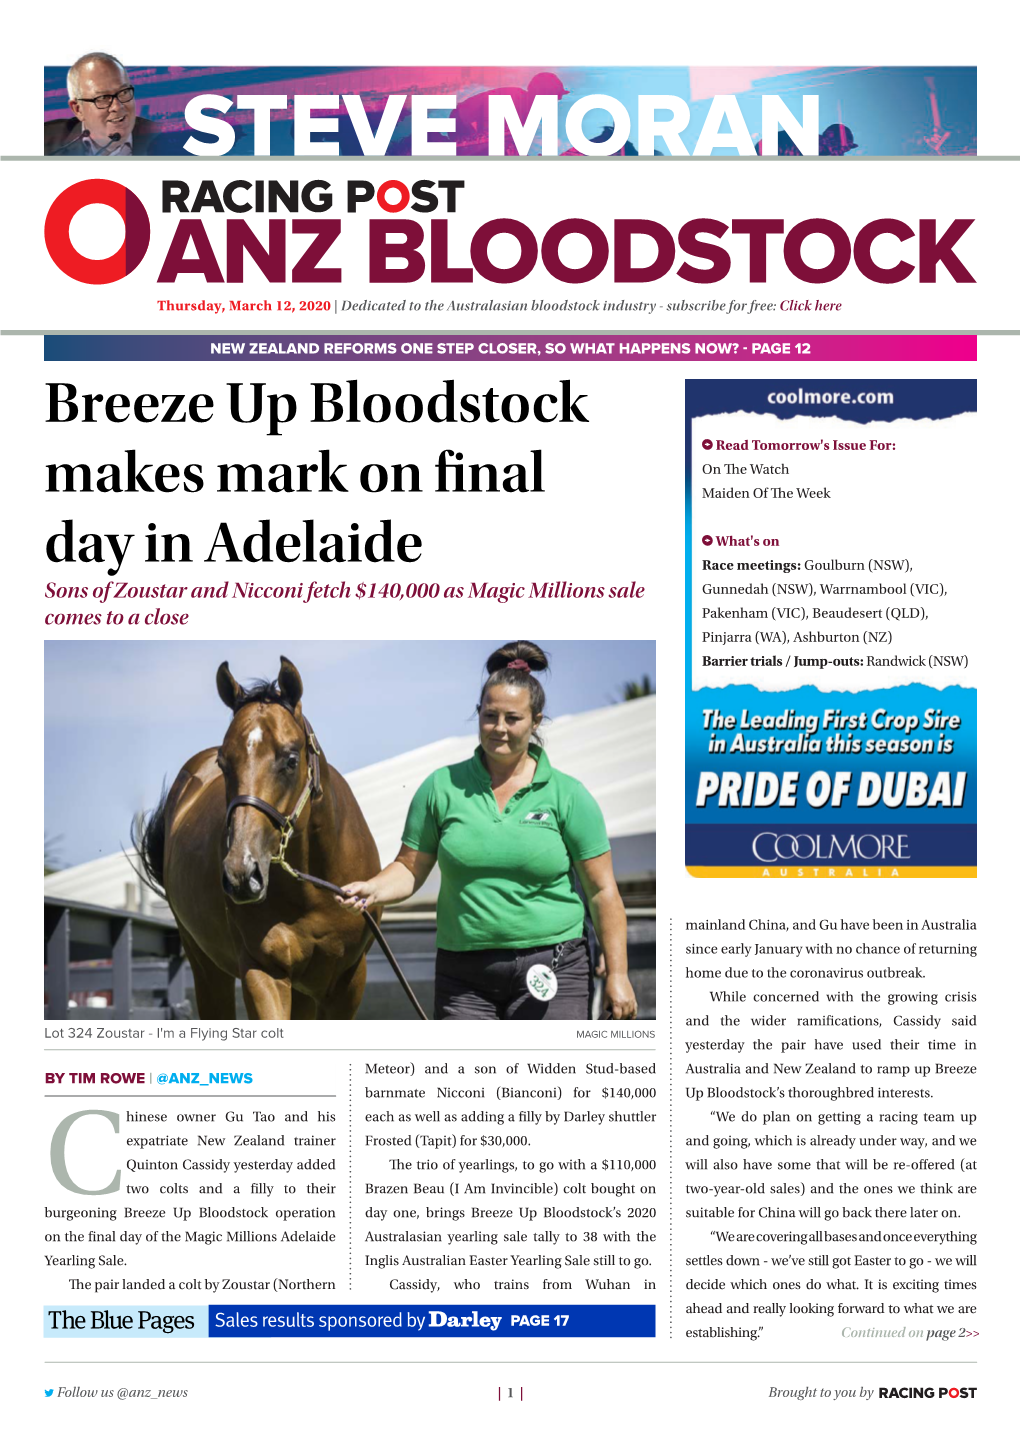 Breeze up Bloodstock Makes Mark on Final Day in Adelaide | 2 | Thursday, March 12, 2020